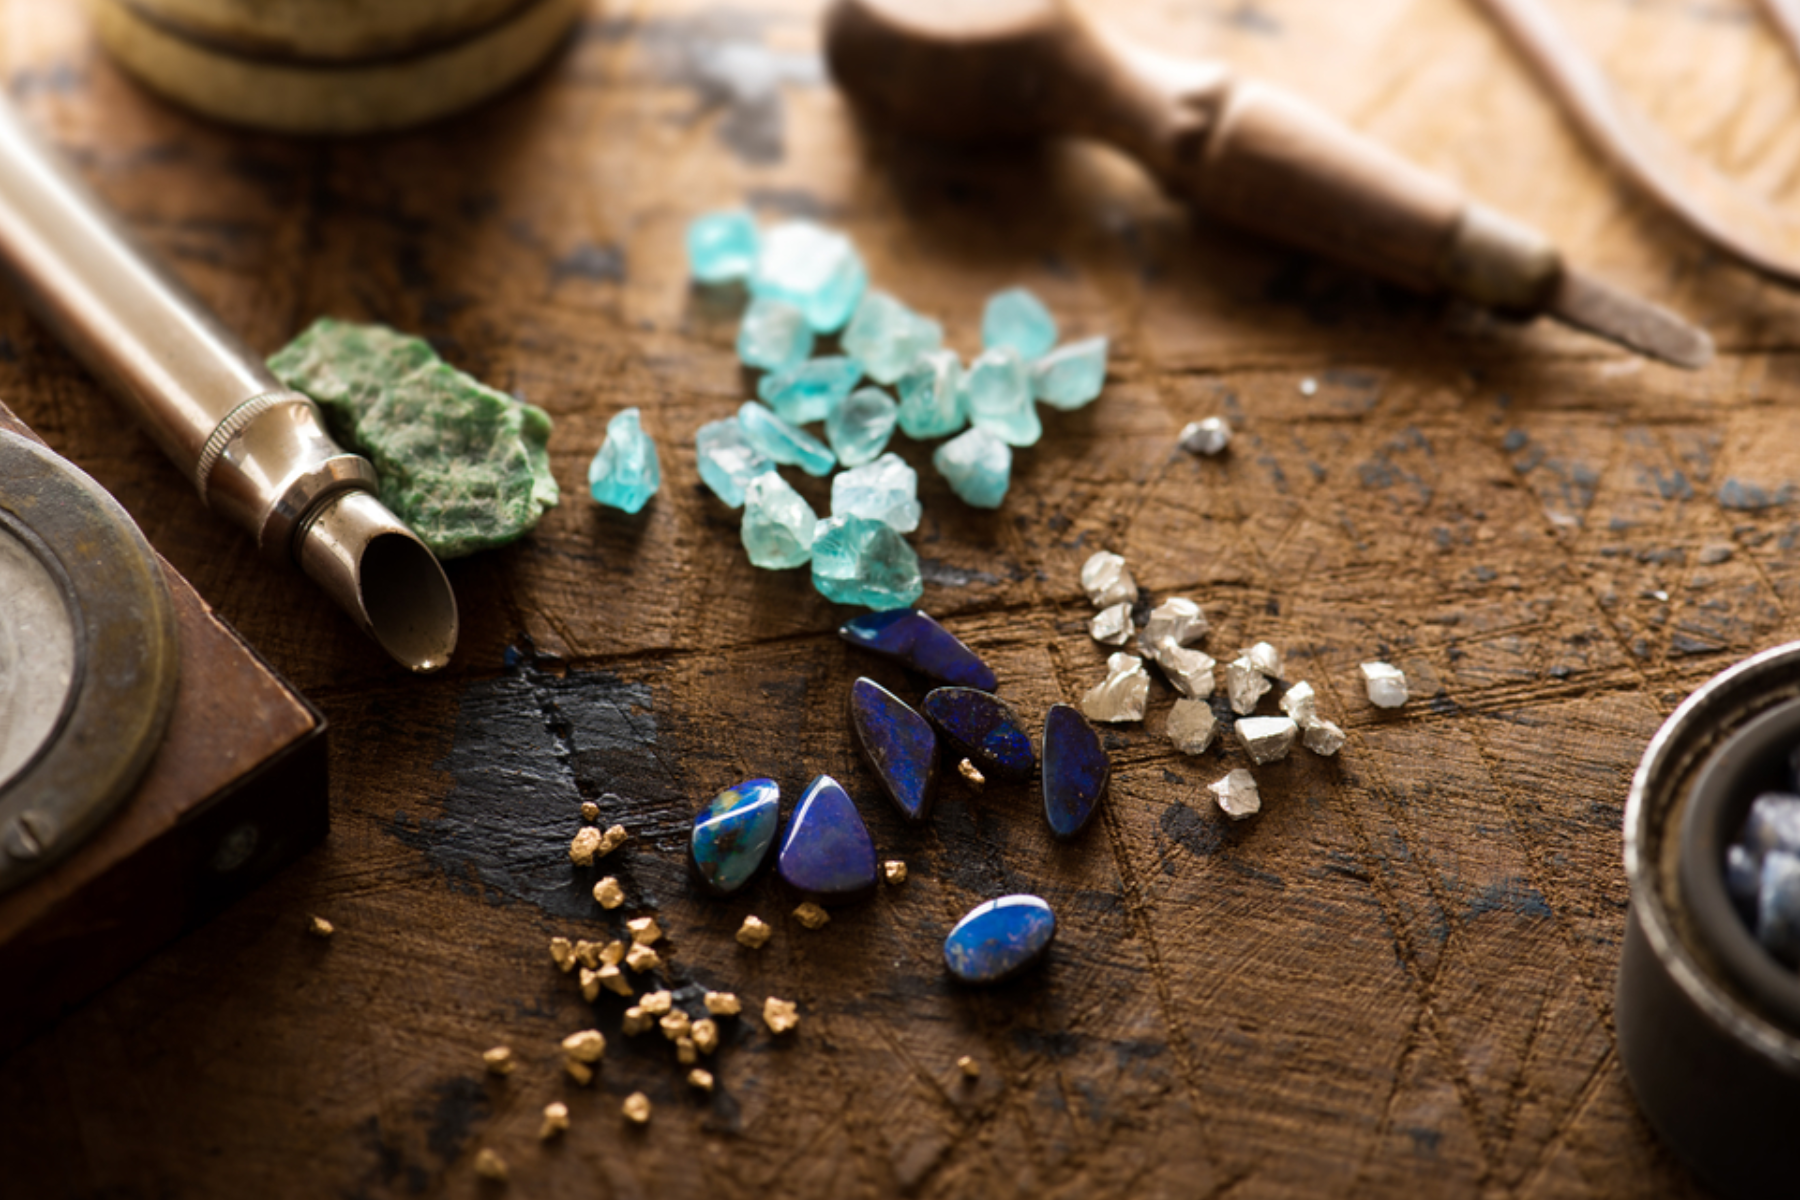 Many varieties of gemstone nuggets at the table